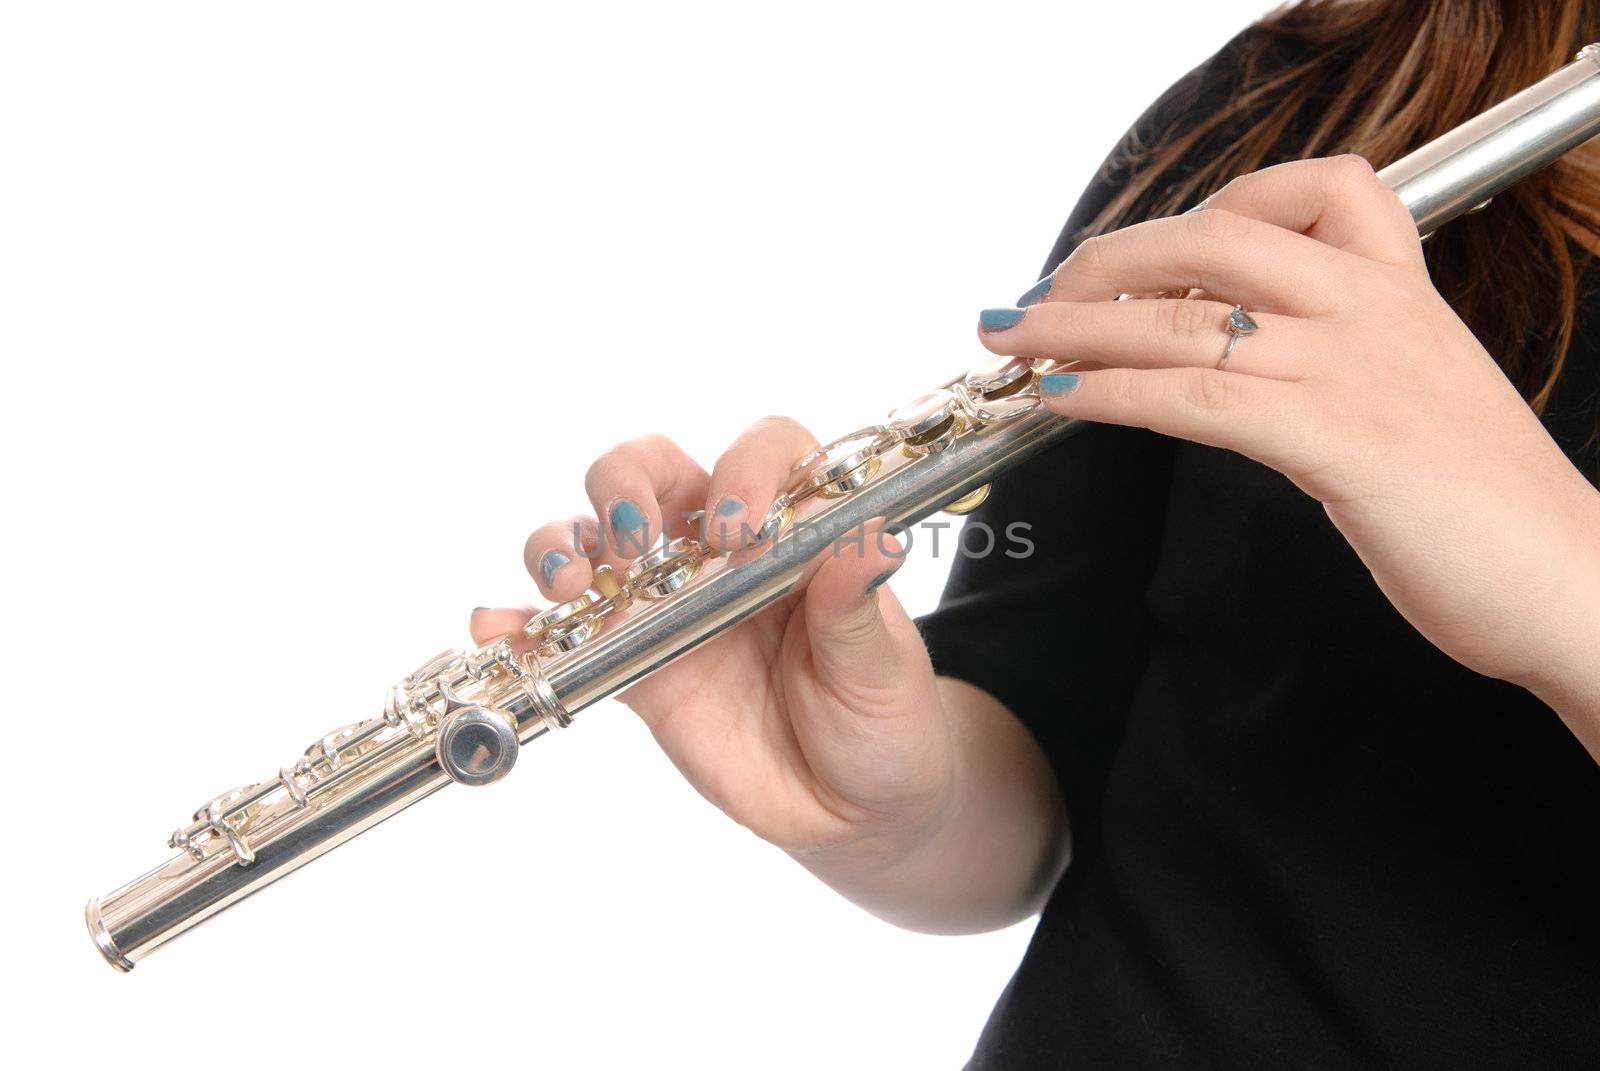 A closeup view of a musical flute being played by a girl, isolated against a white background.